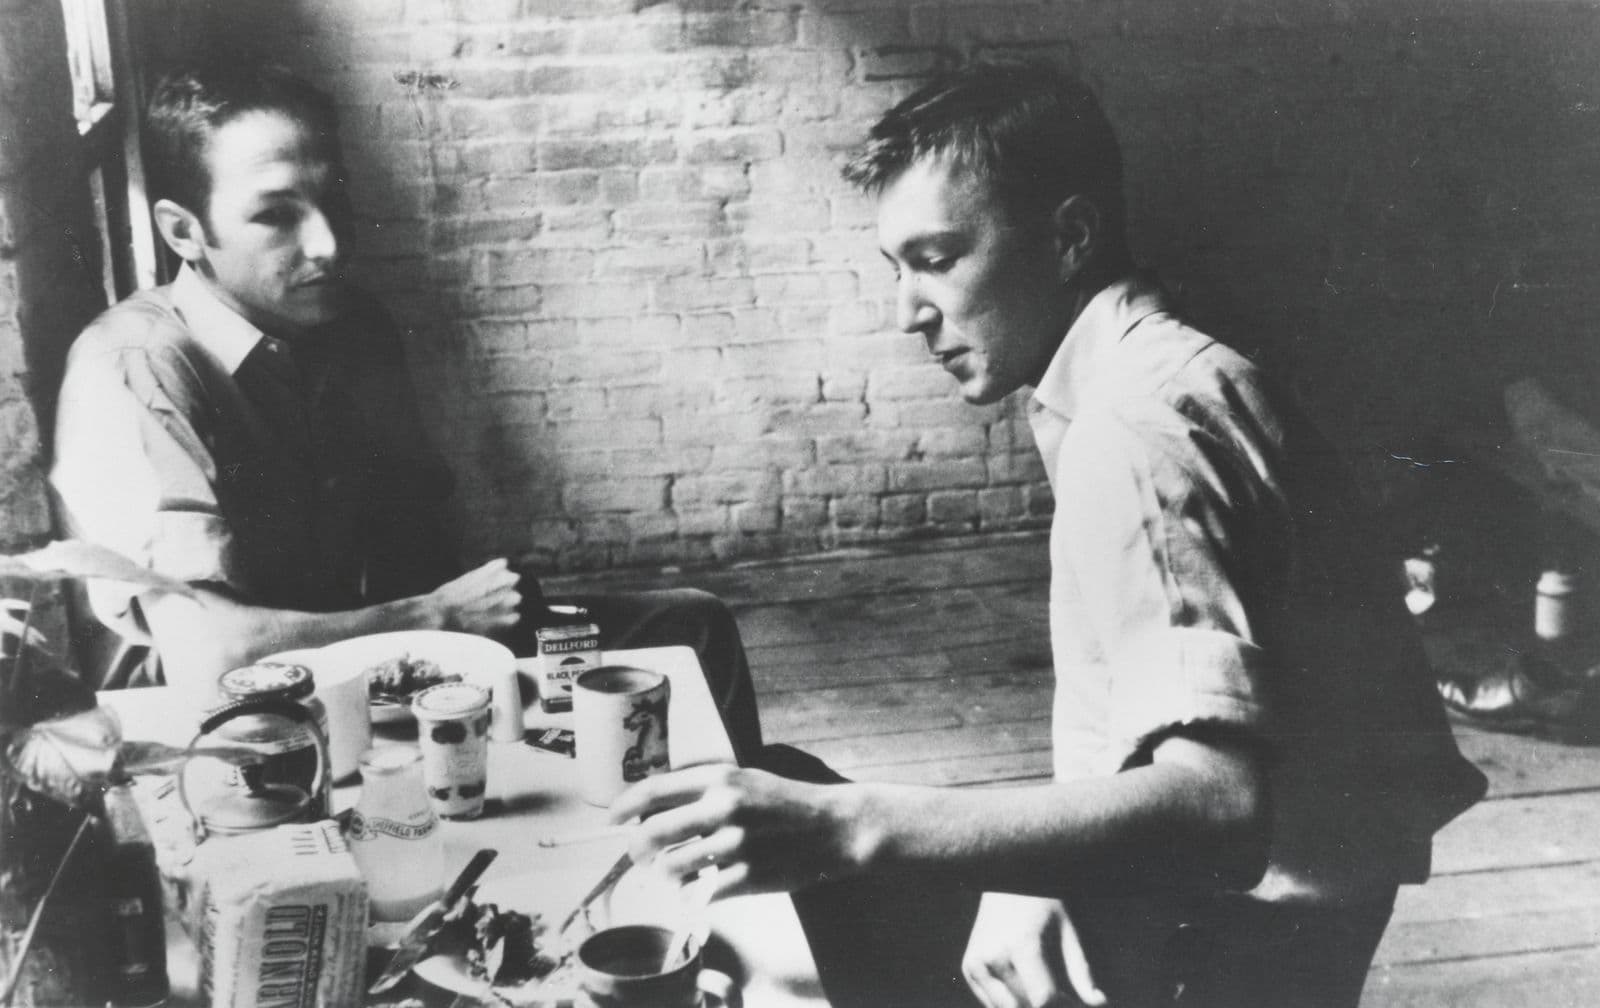 Two men sit at a table covered in mugs and art supplies.